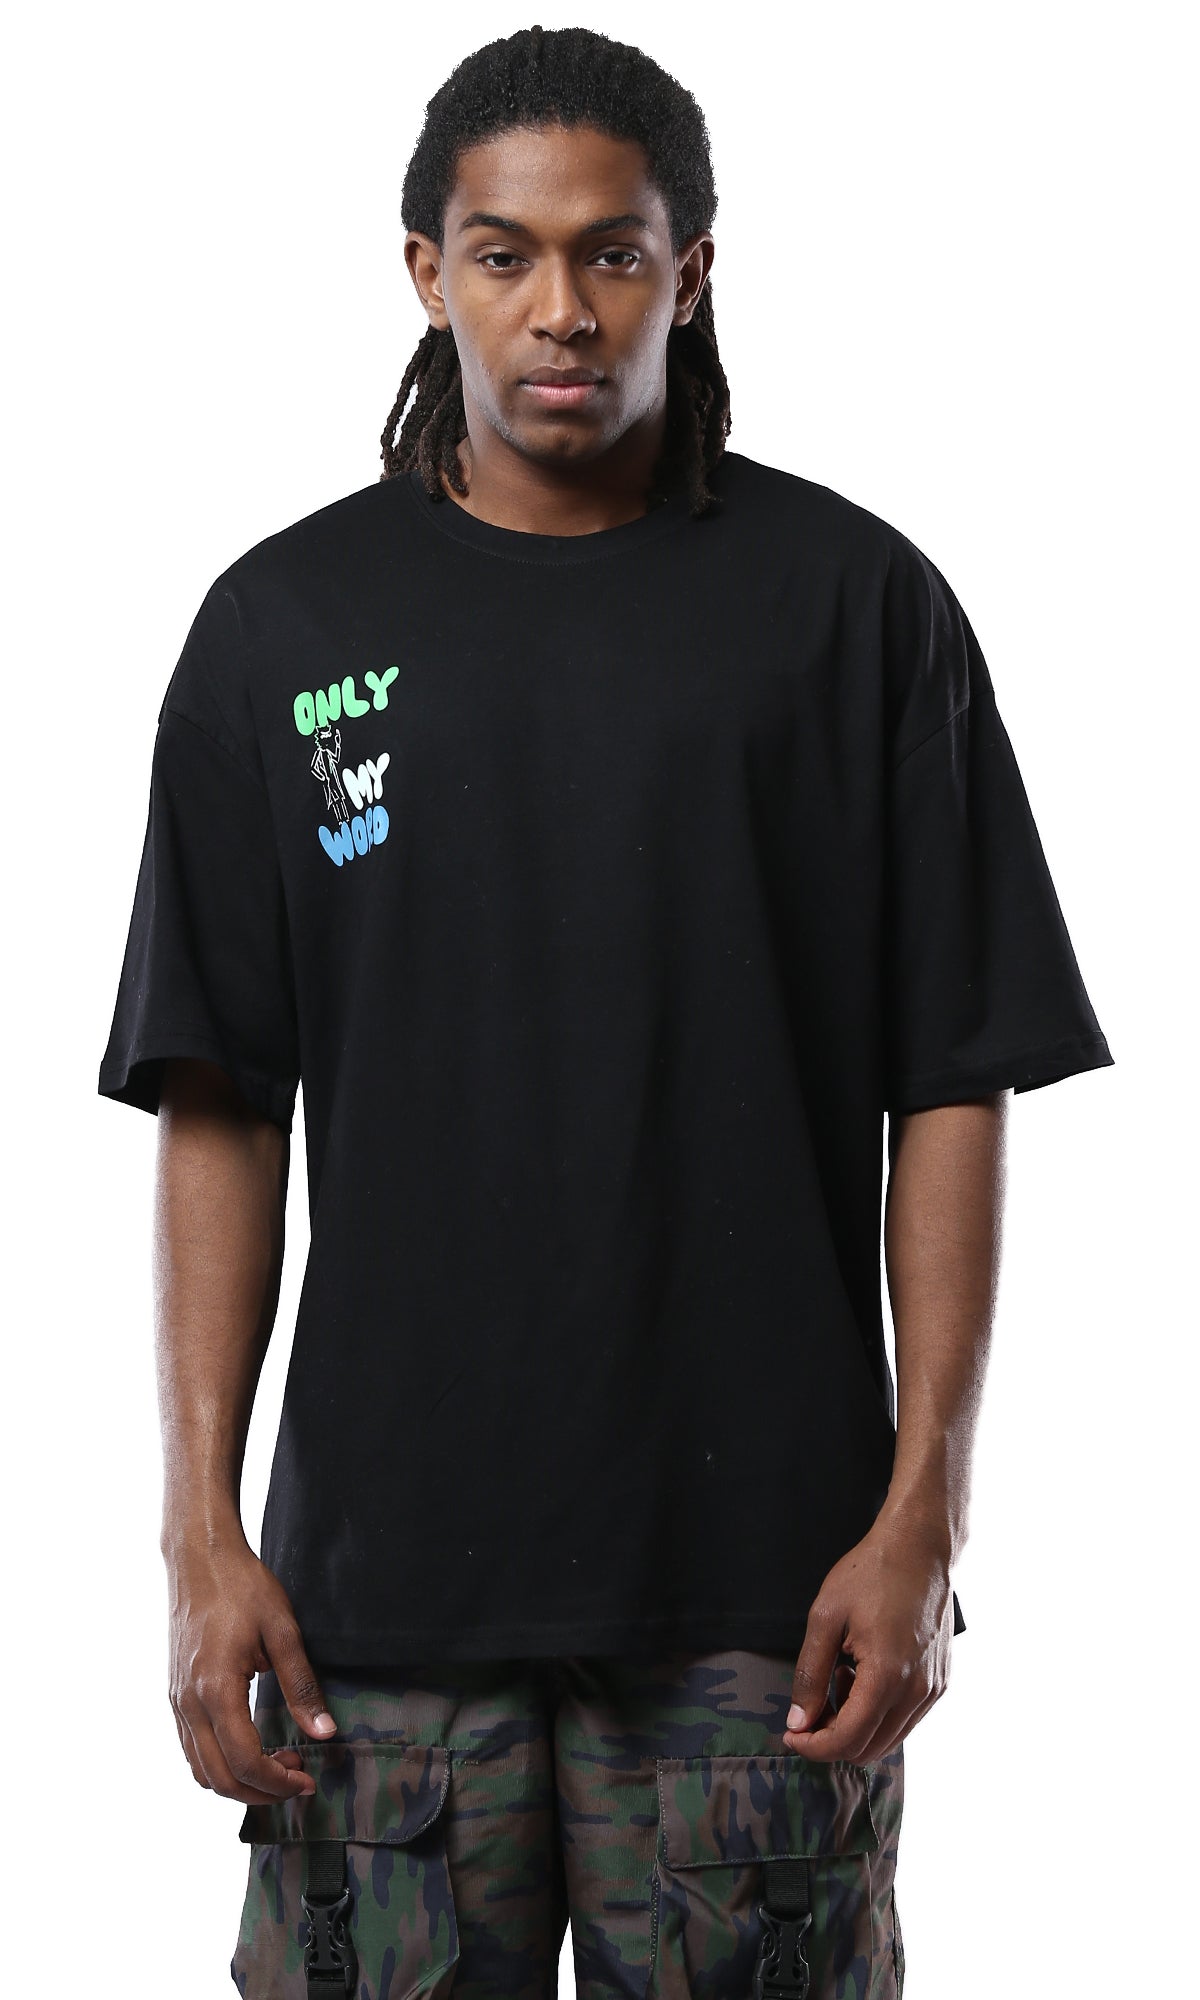 O178393 Printed "Only My World" Black Tee With Elbow Sleeves